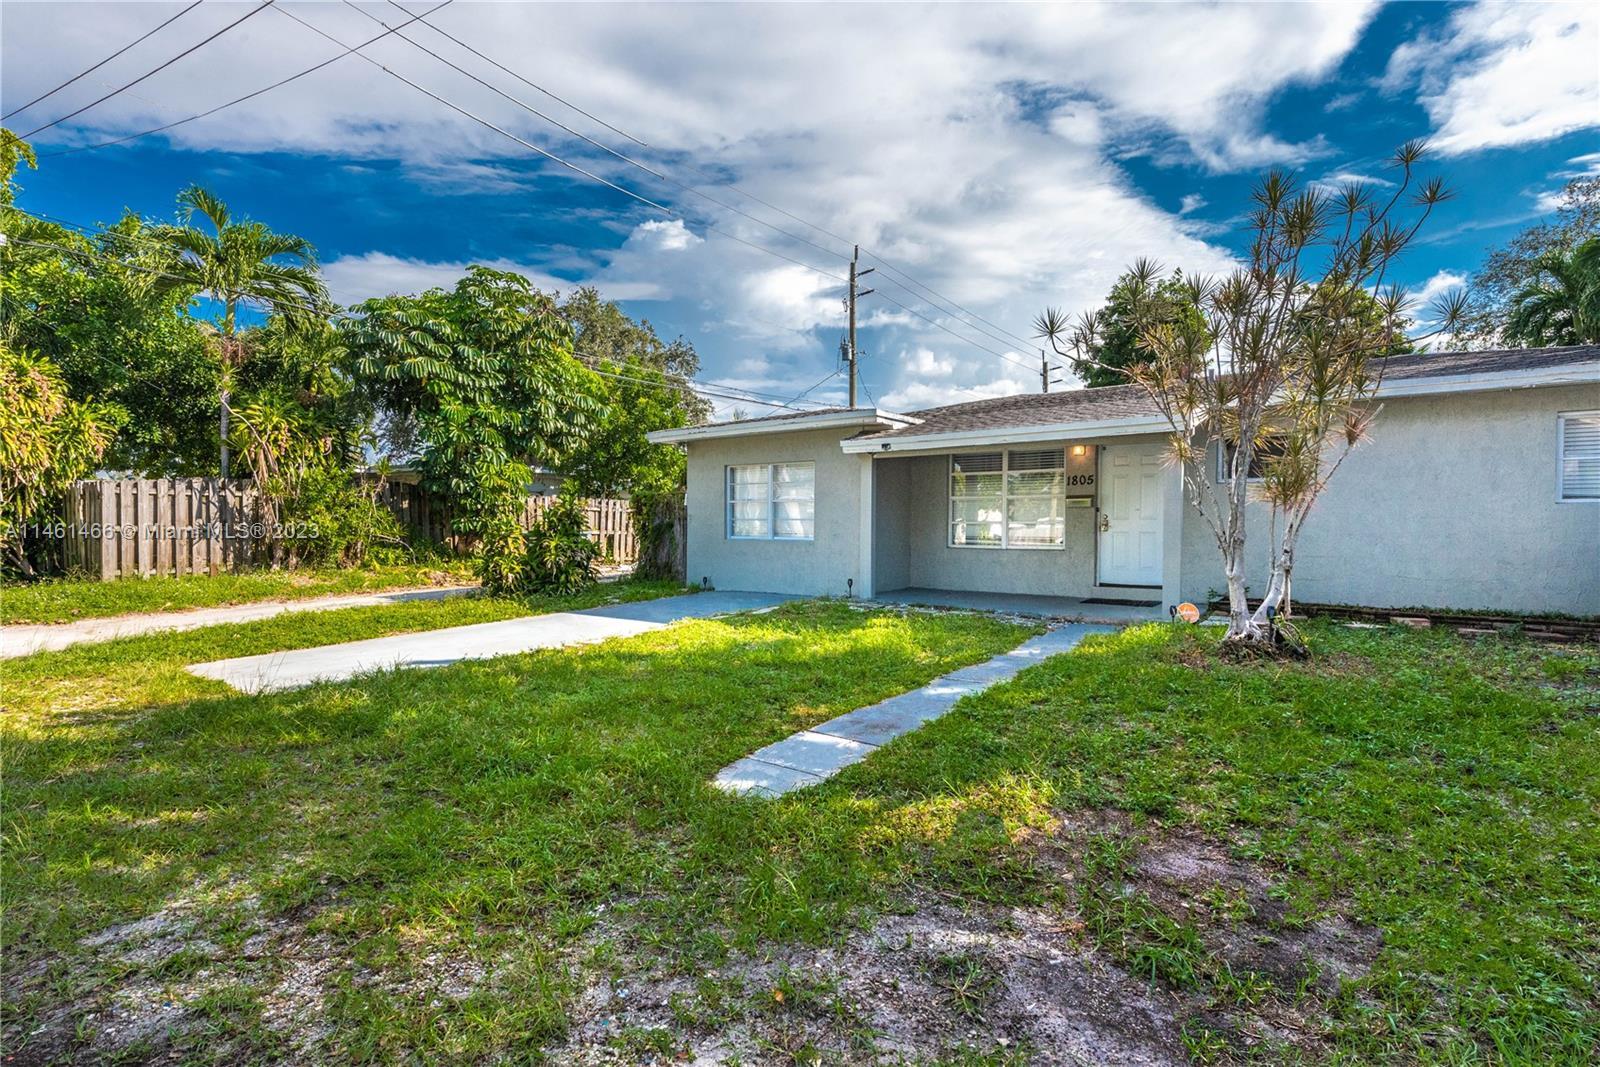 Beautifully renovated 3-bed 3-bath home in the heart of Hollywood, FL! Generously sized bedrooms. La